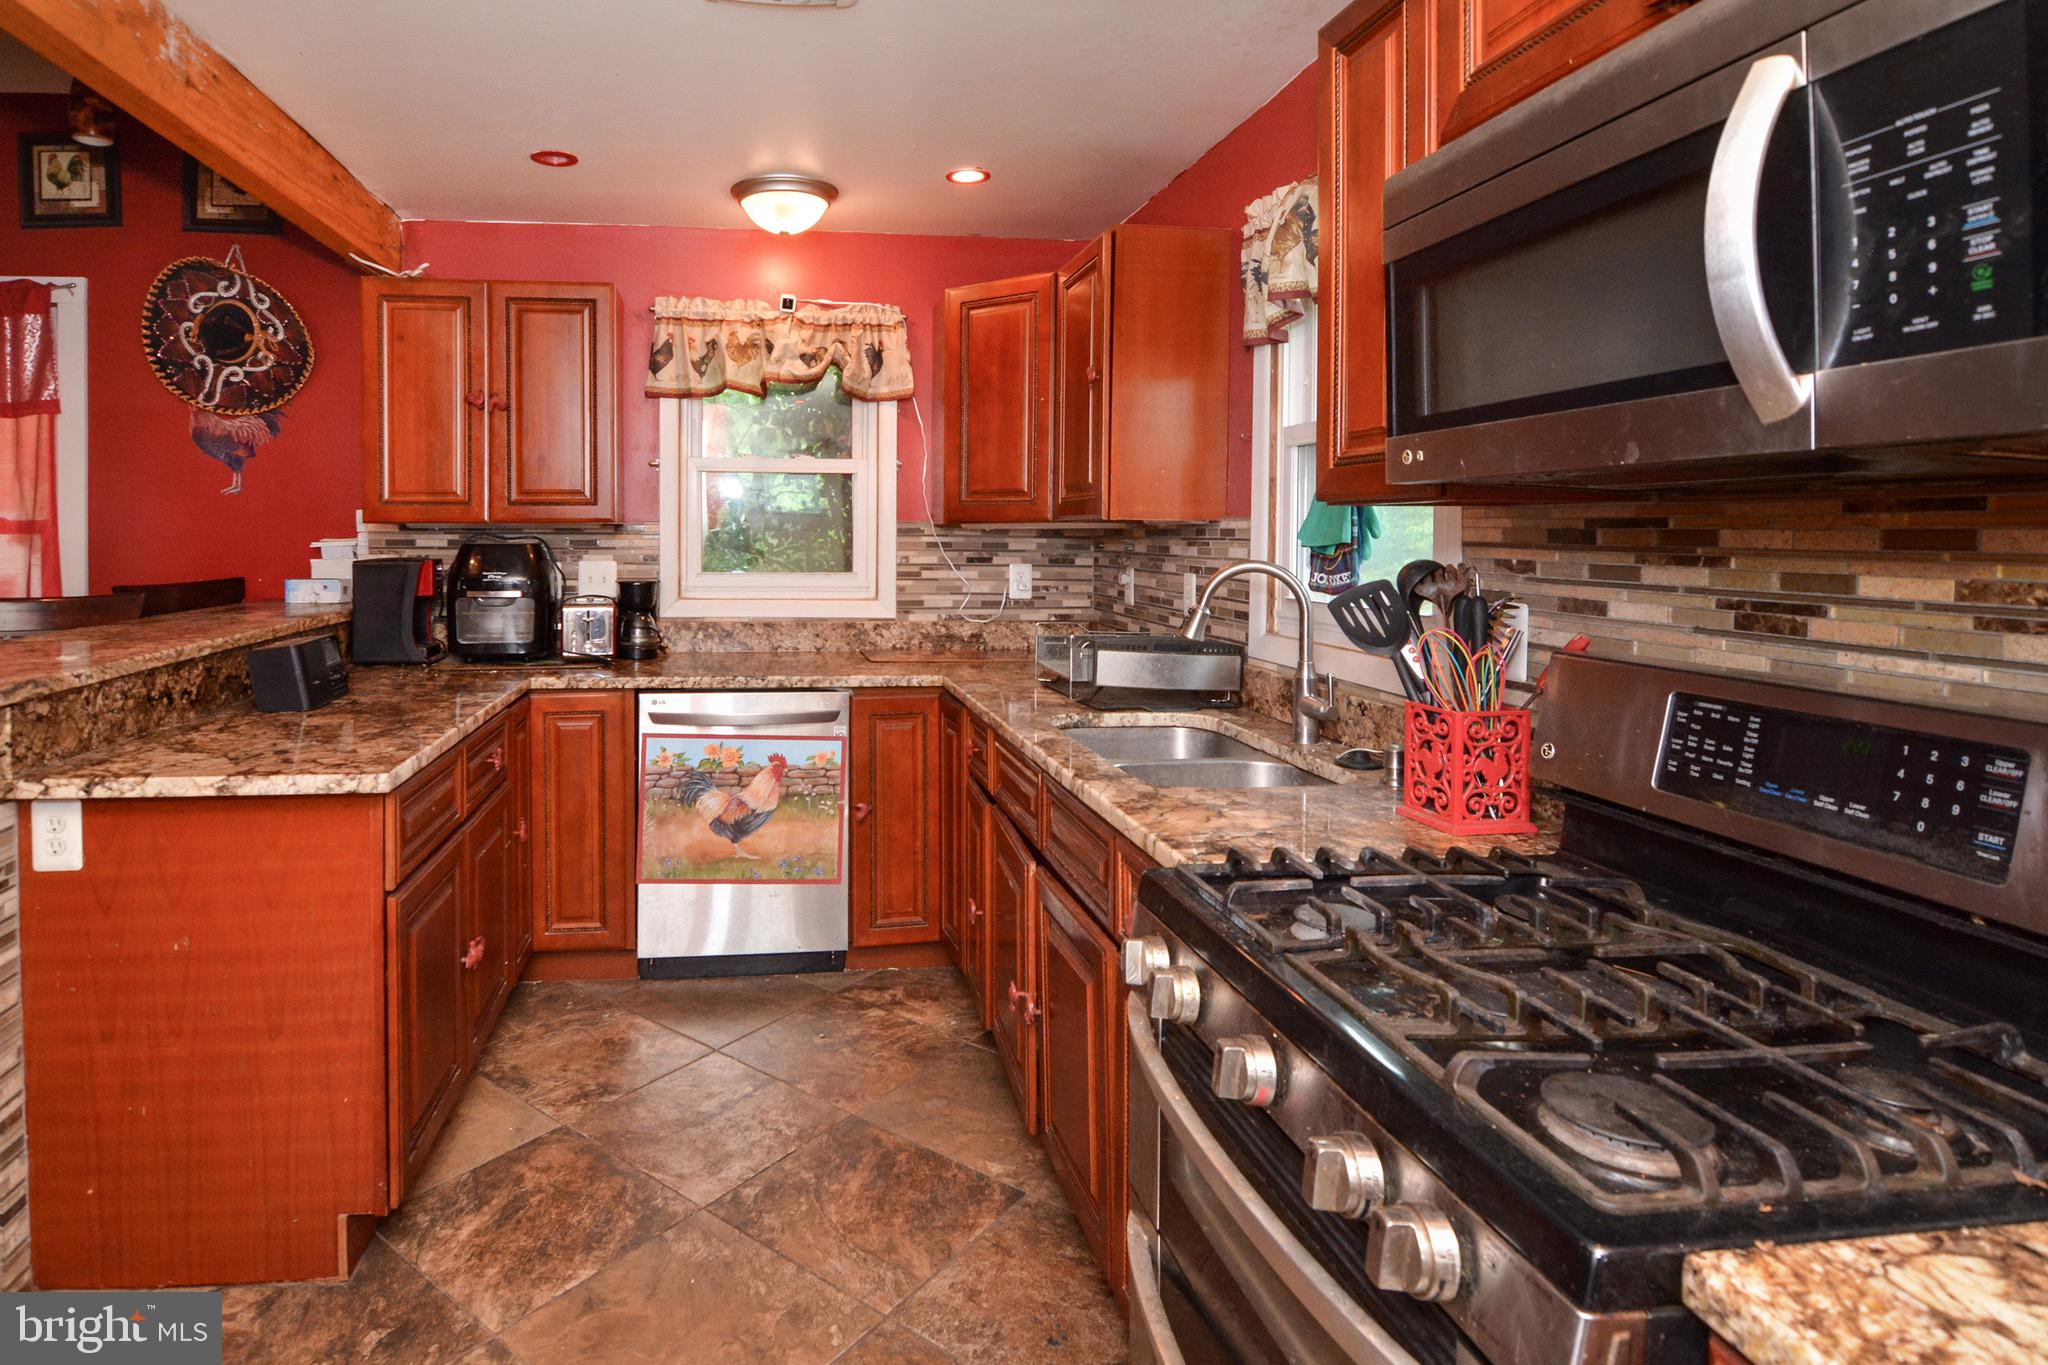 a kitchen with stainless steel appliances granite countertop a stove a sink dishwasher and cabinets with wooden floor